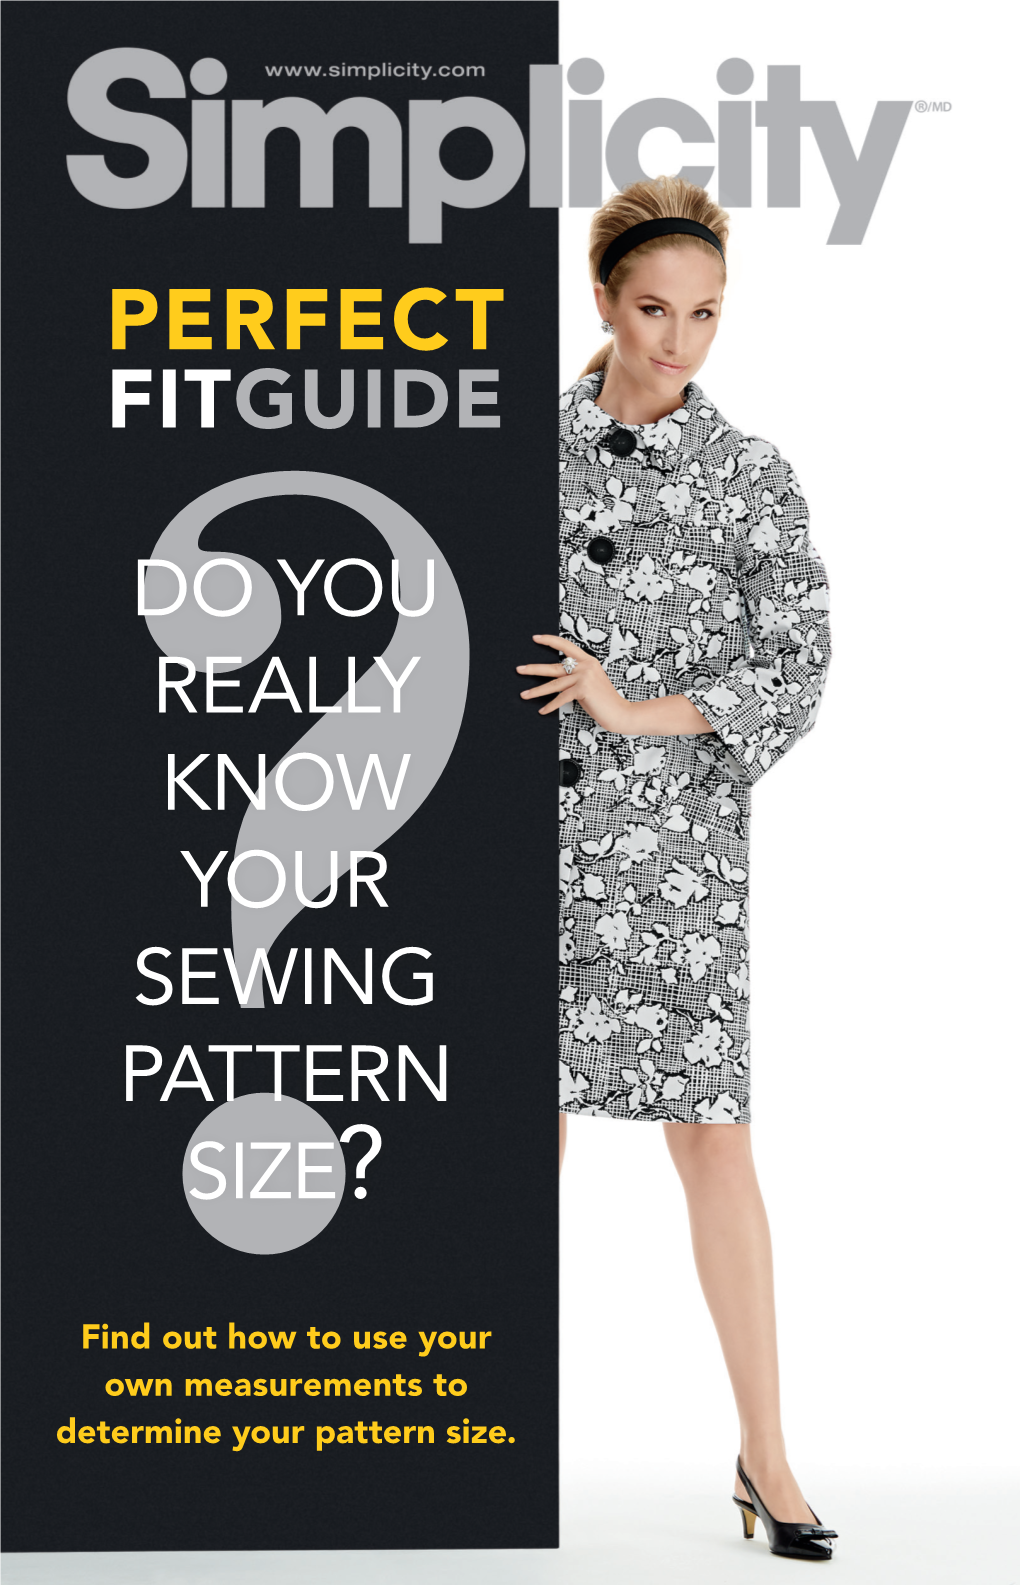 Do You Really Know Your Sewing Pattern Size?